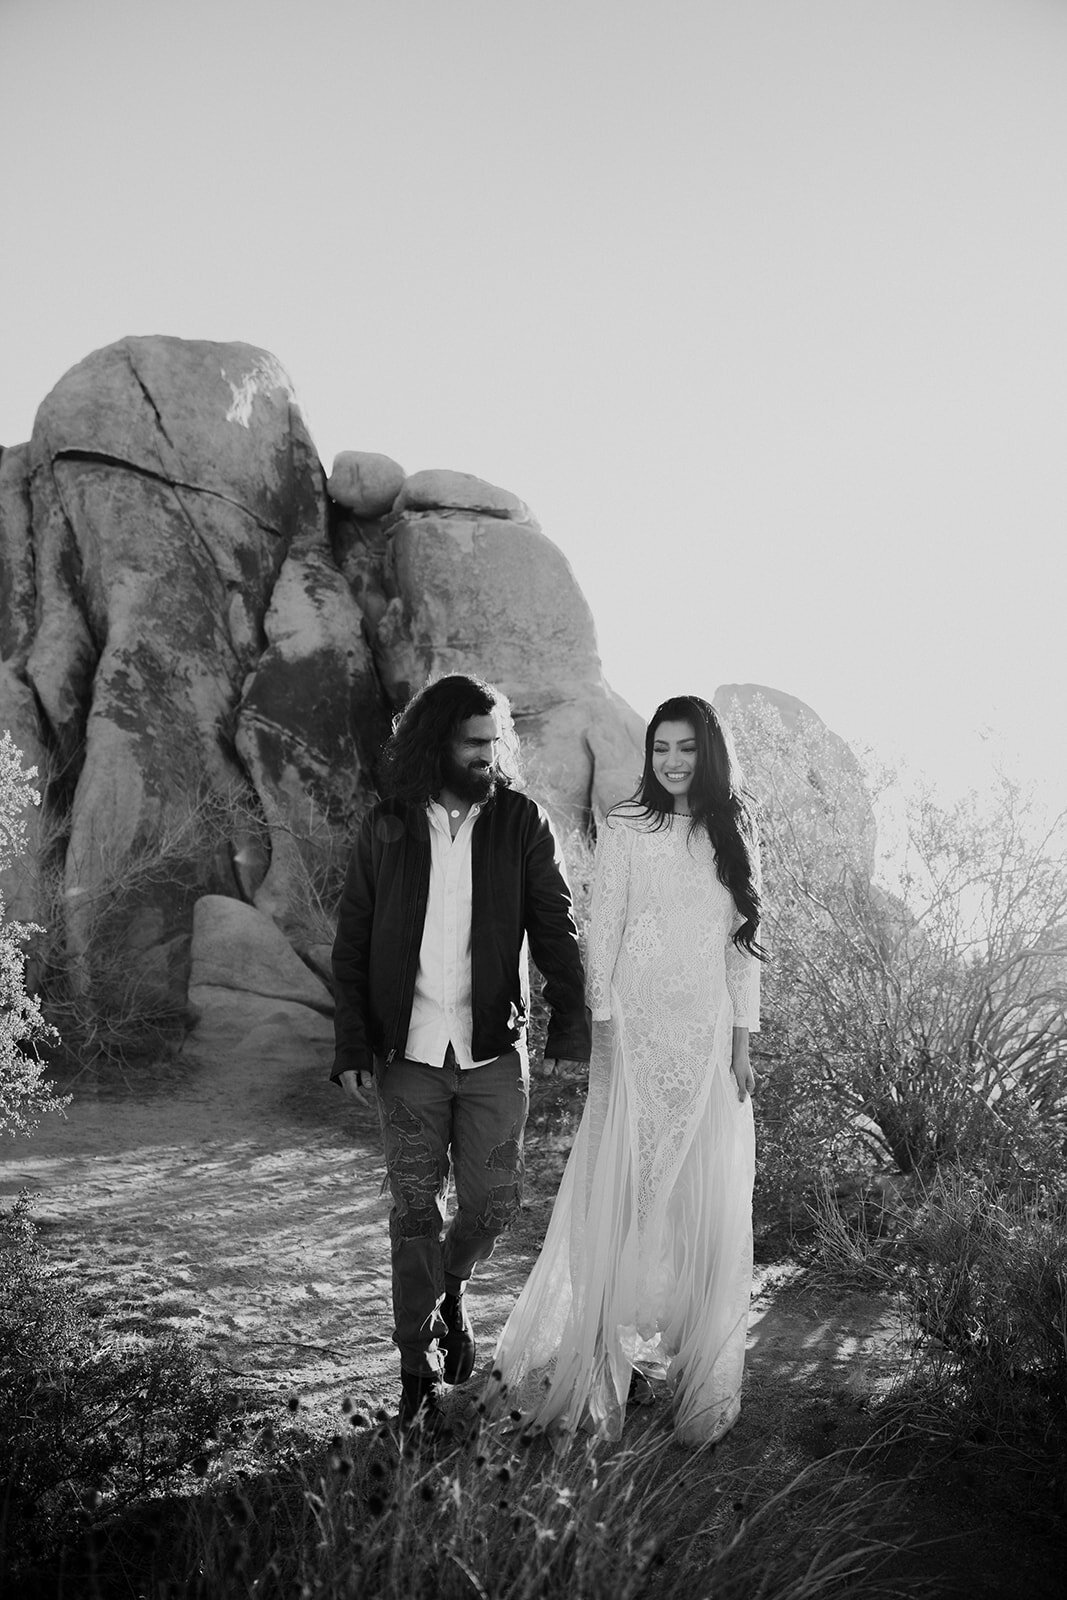 Wedding couple walking in front of rock formation